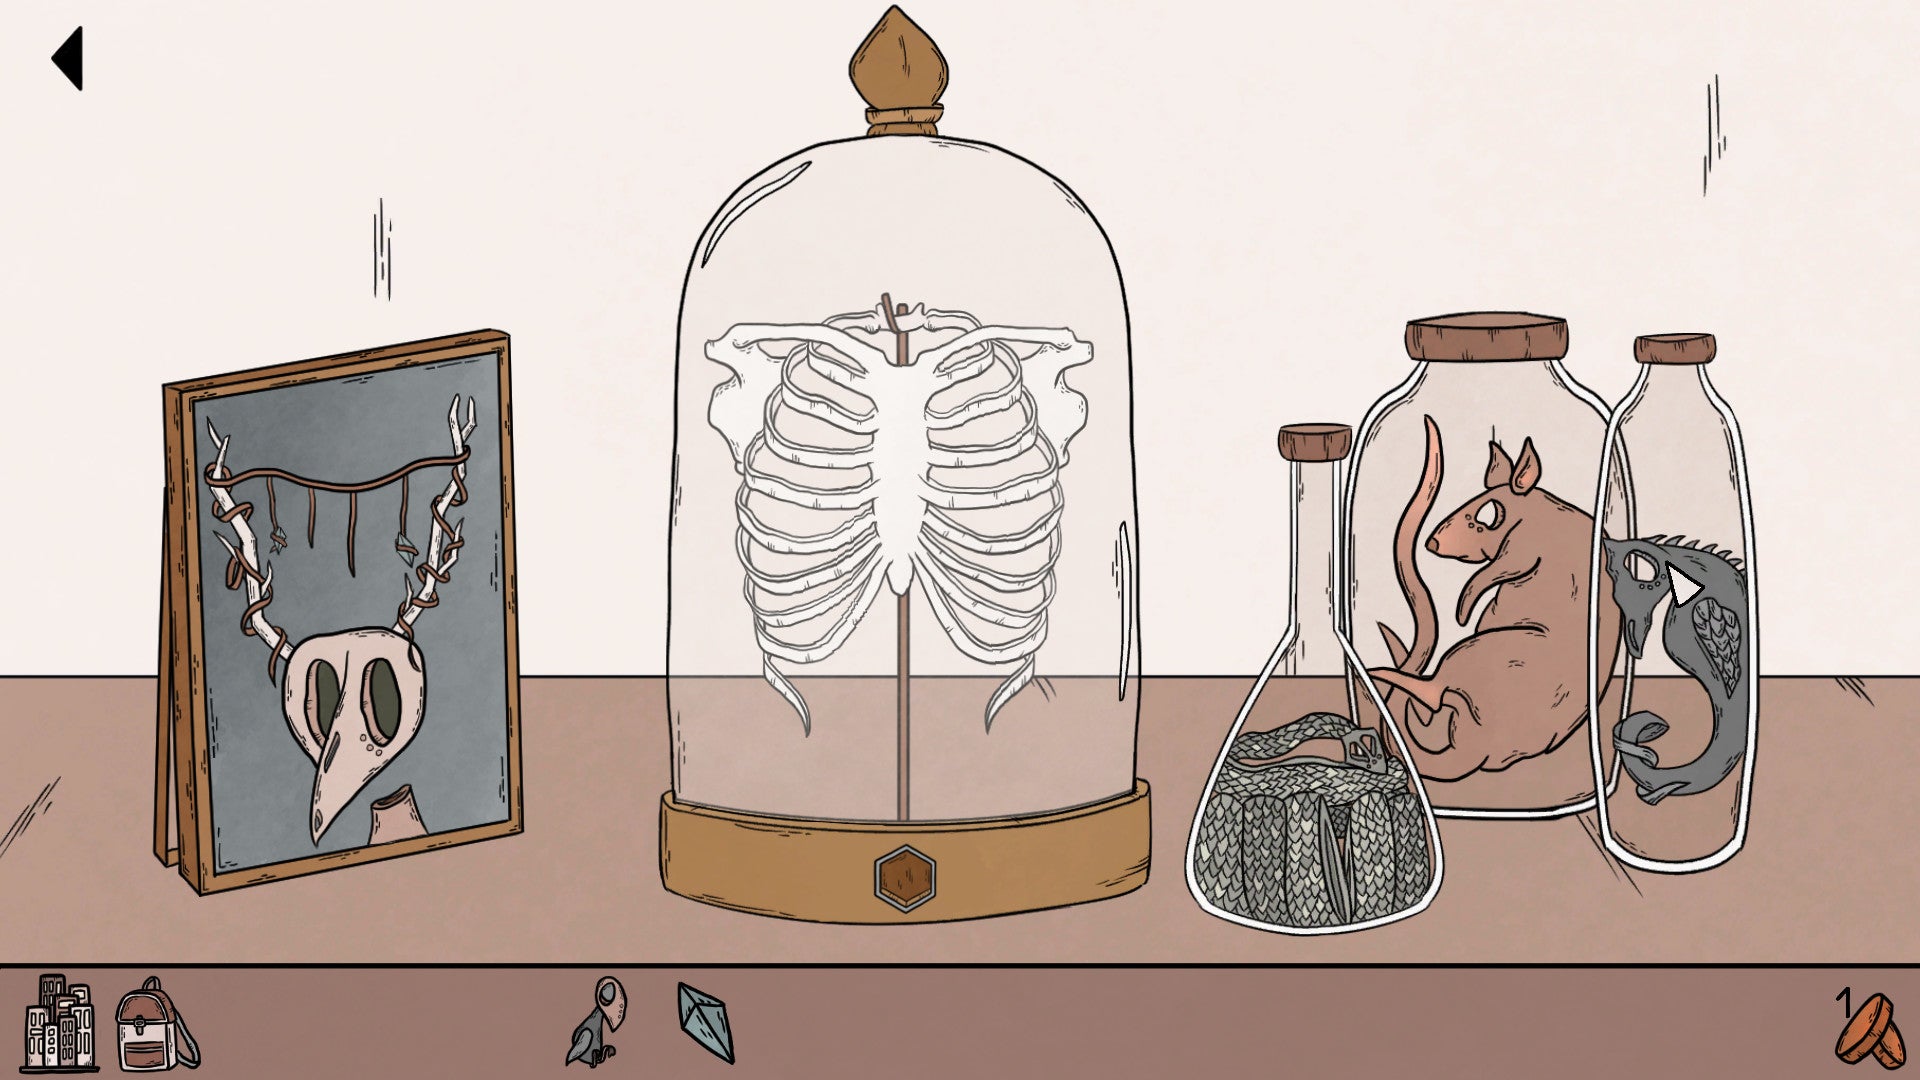 A screenshot from Birth which shows some ribs in a glass, a portrait of a bloke with antlers, and some animals in jars.